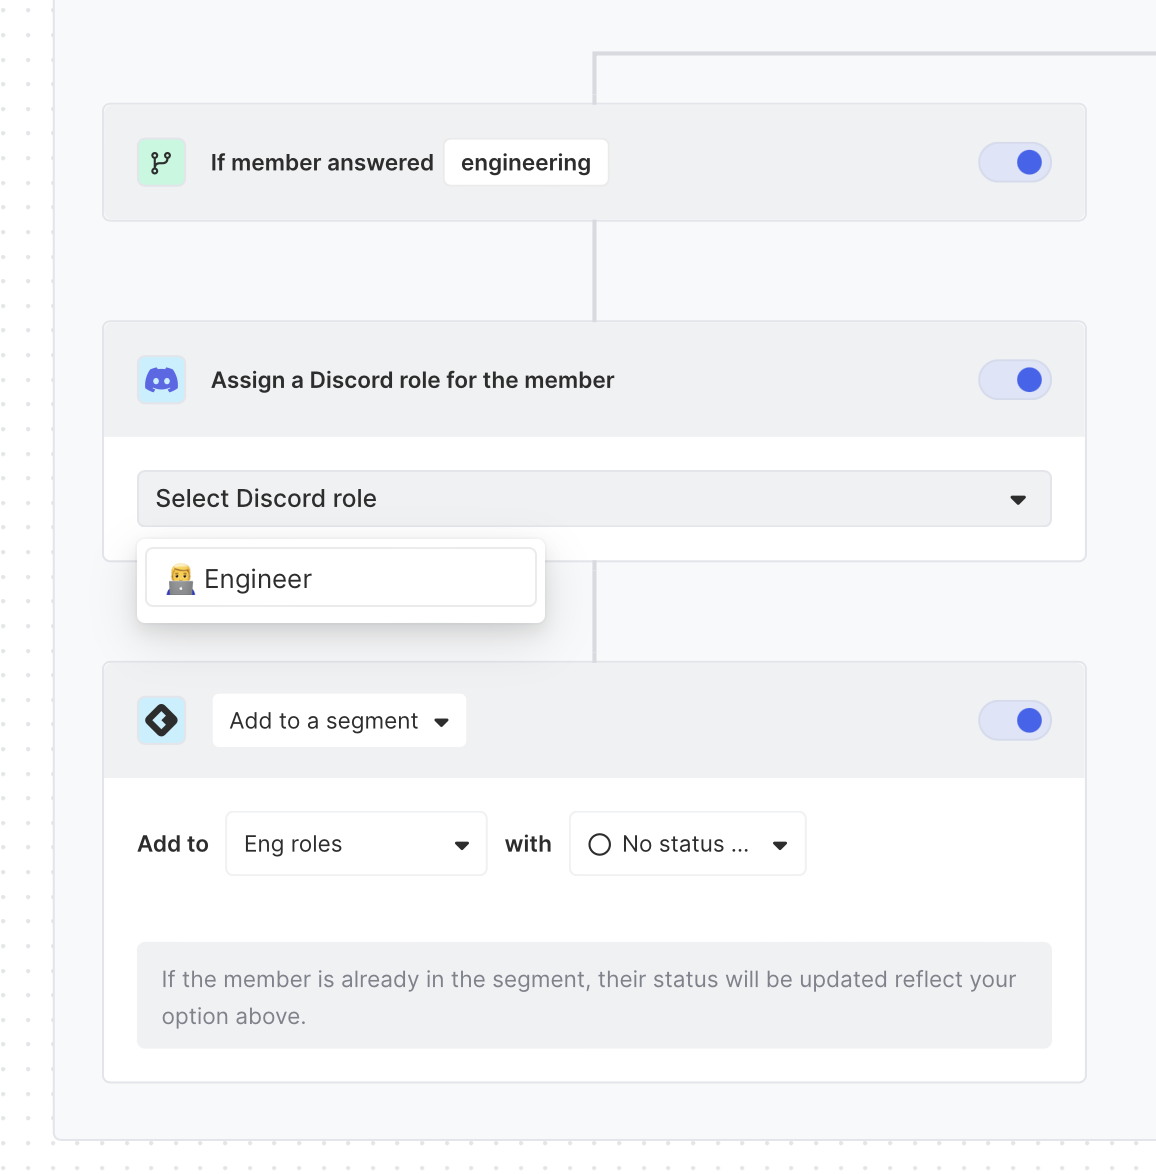 Assign a Discord role and add to a Segment